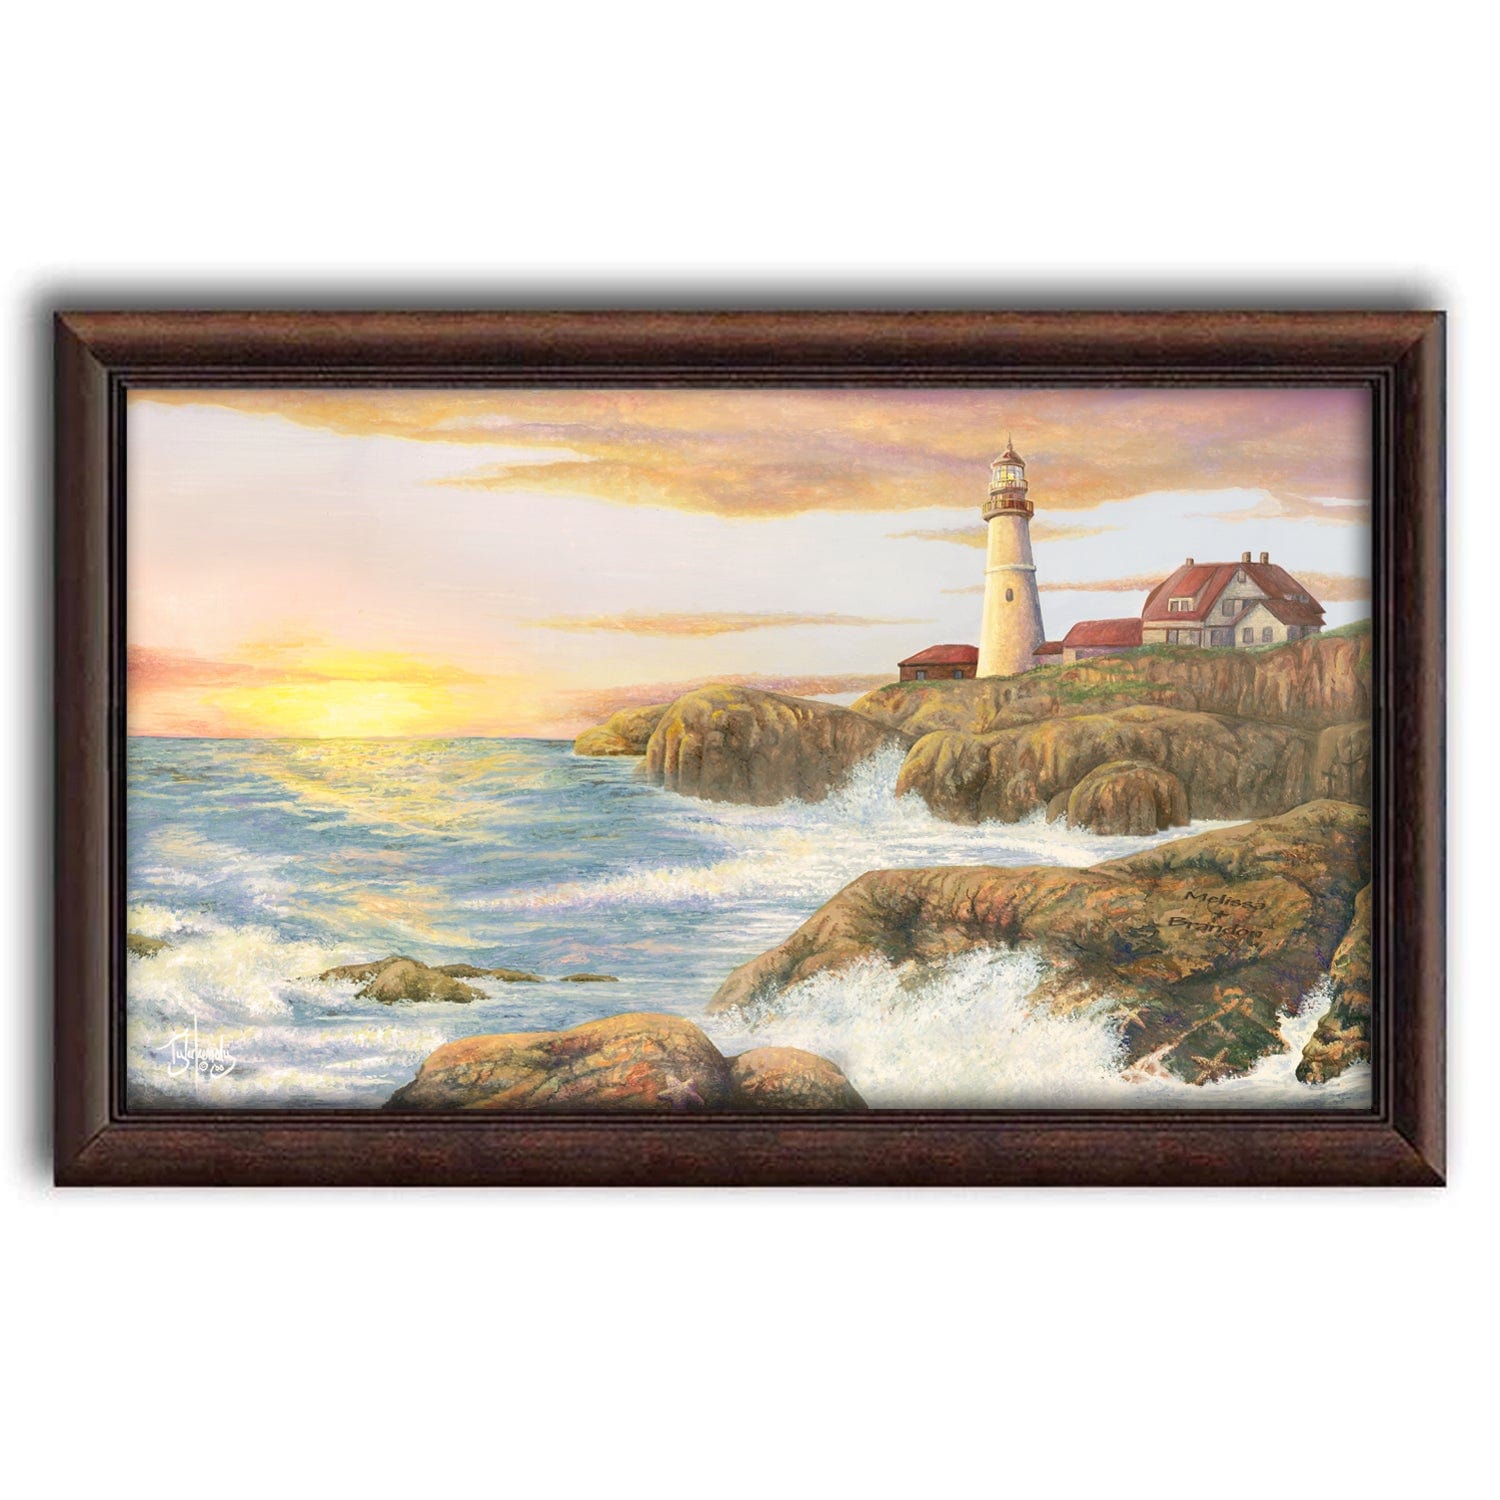 Personalized seascape print of waves crashing against rocks with the sunrise and a lighthouse - Personal-Prints